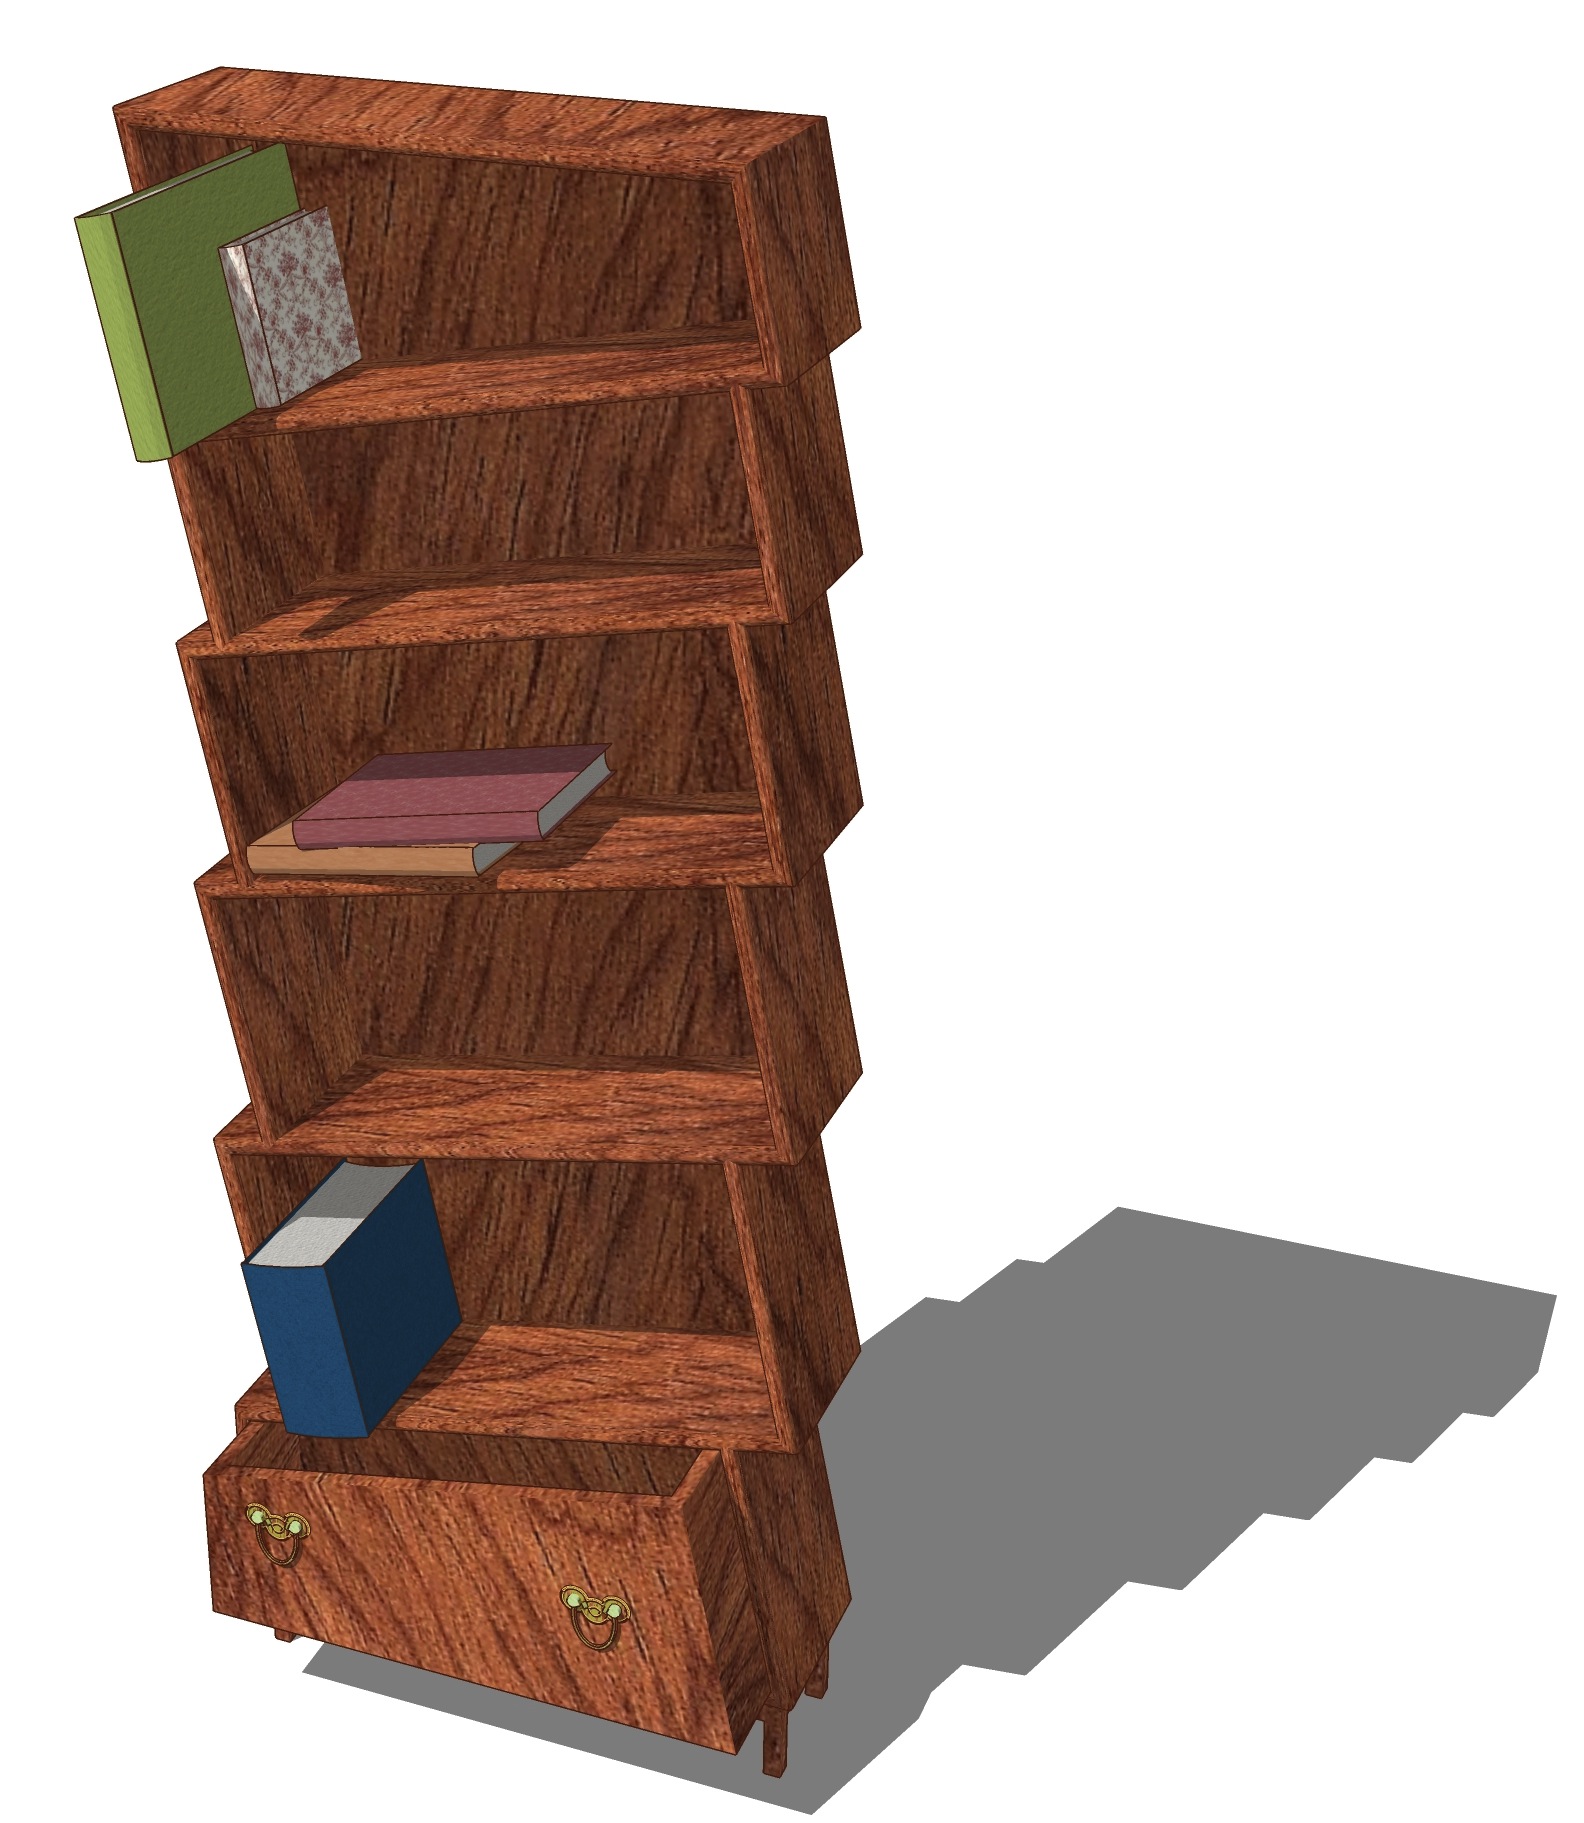 a 3d image of a bookcase and a book